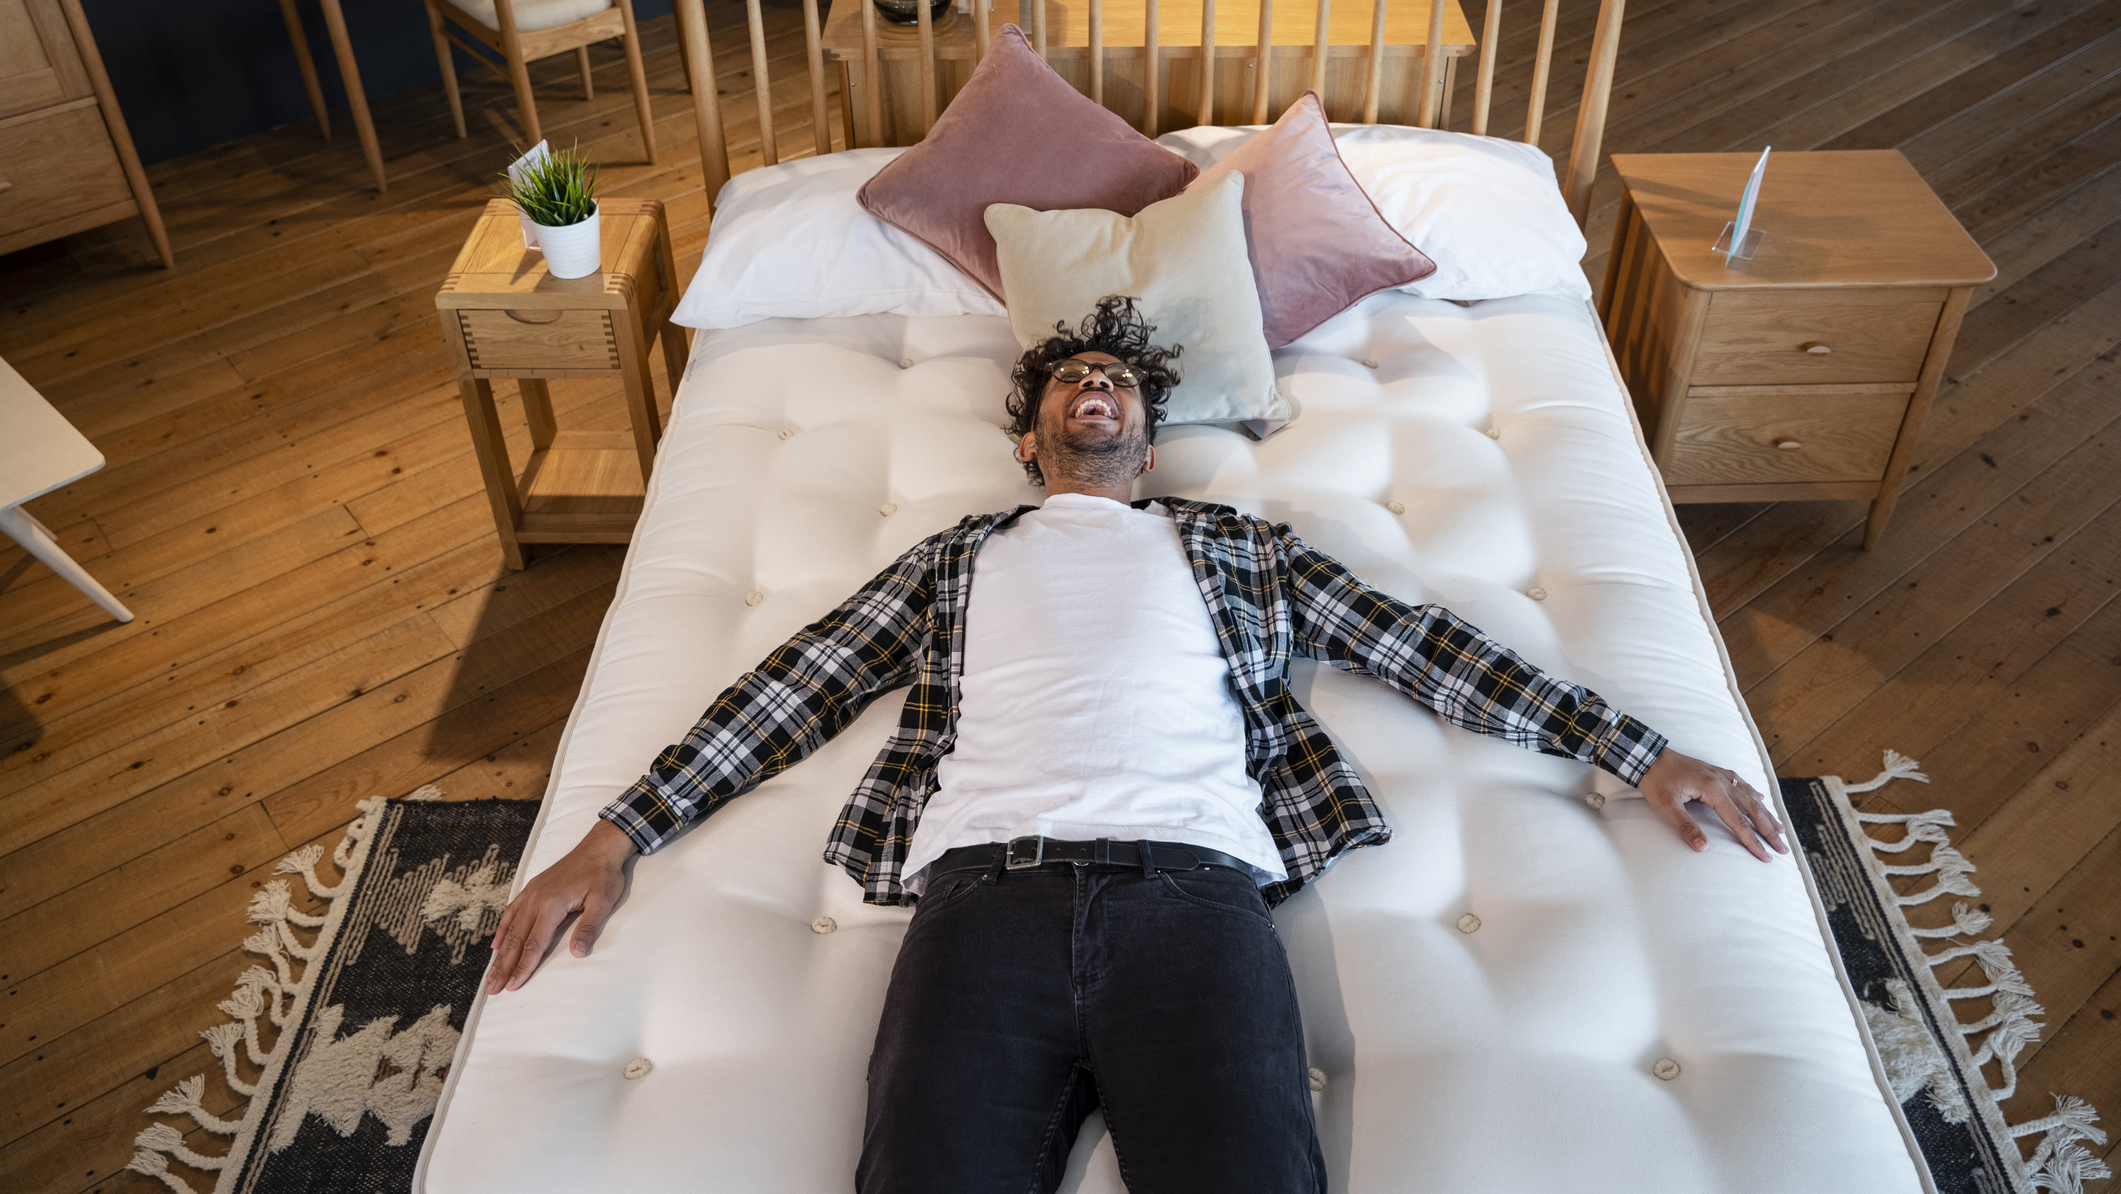 A man lies on top of a comfortable white mattress placed on a support spring.